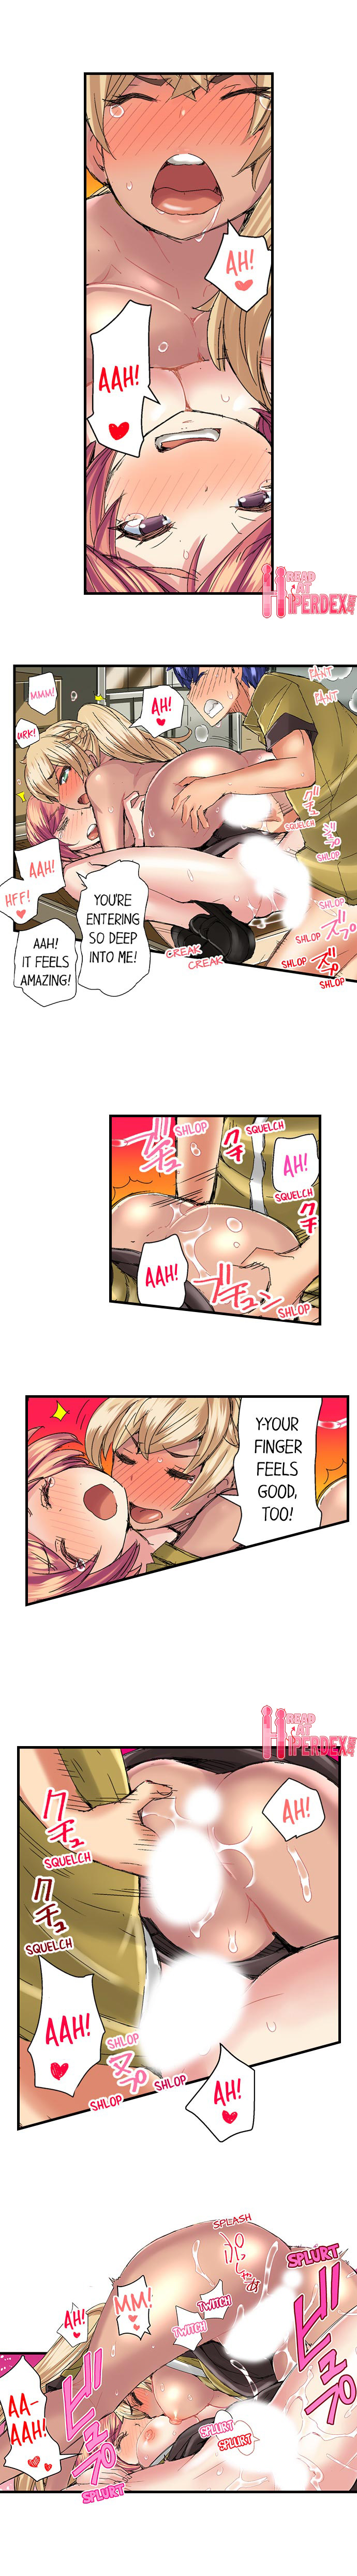 Taking a Hot Tanned Chick’s Virginity - Chapter 38 Page 5